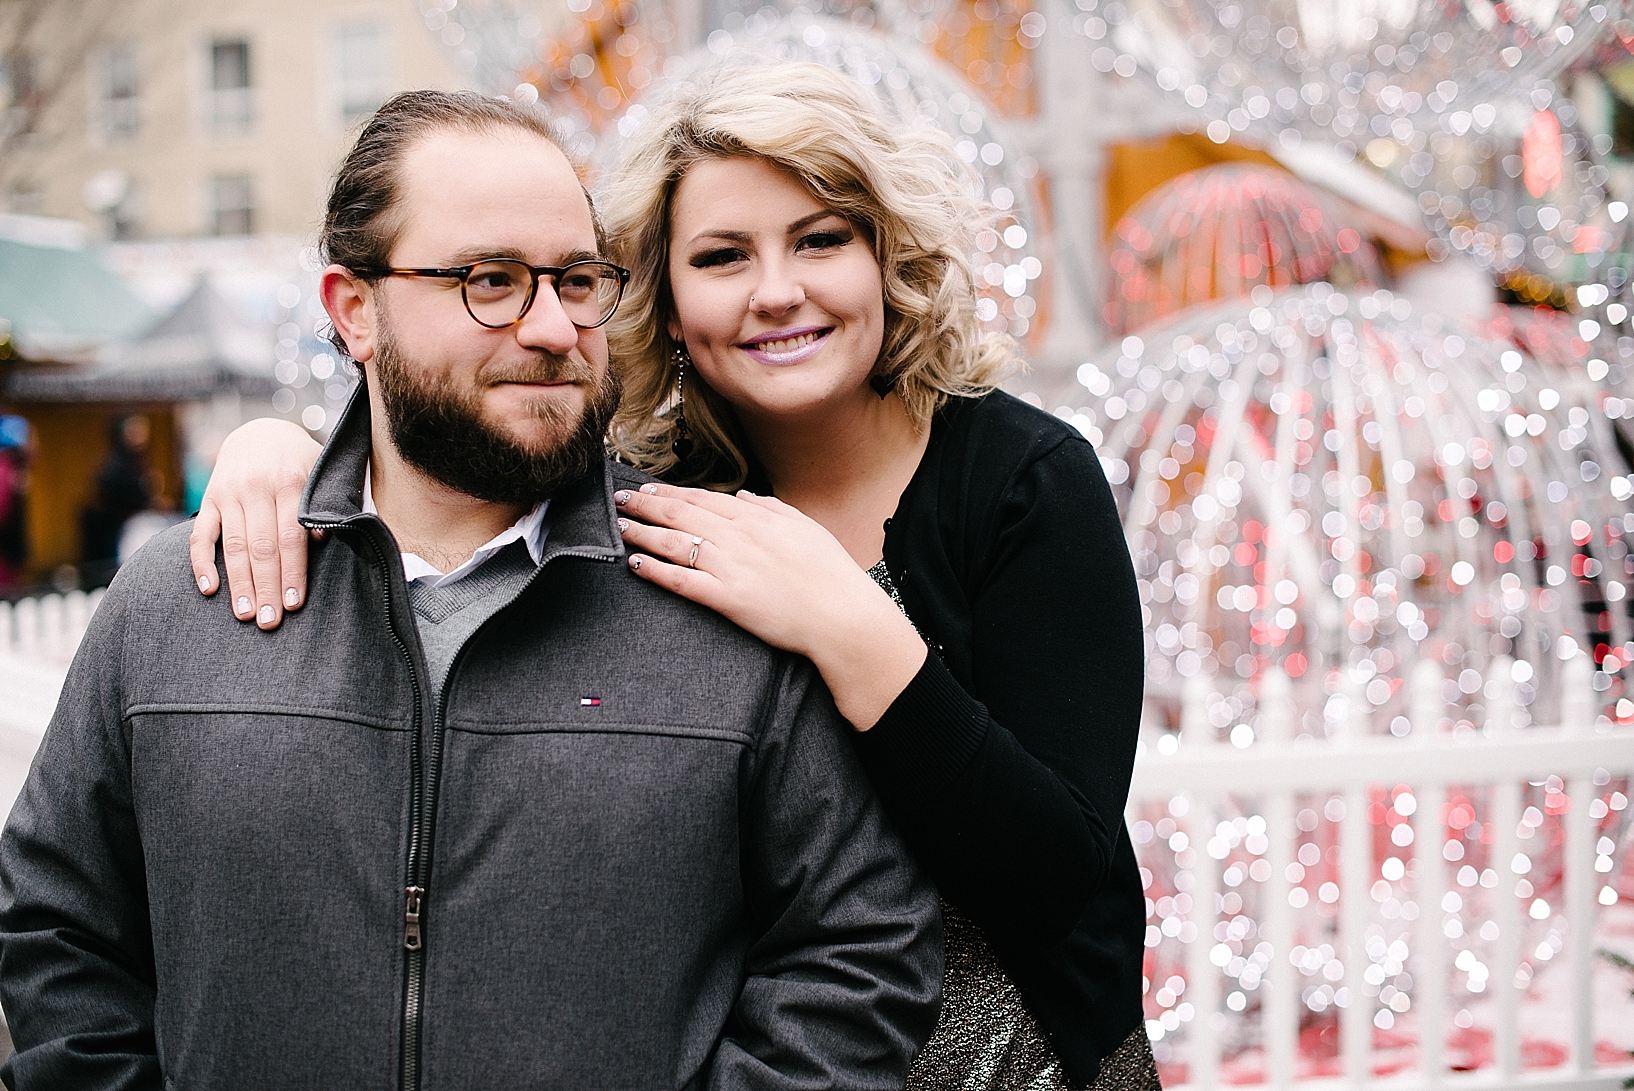 https://carlynkphotography.com/wp-content/uploads/2016/12/PPG-Place-Pittsburgh-Engagement-Pictures_0001.jpg